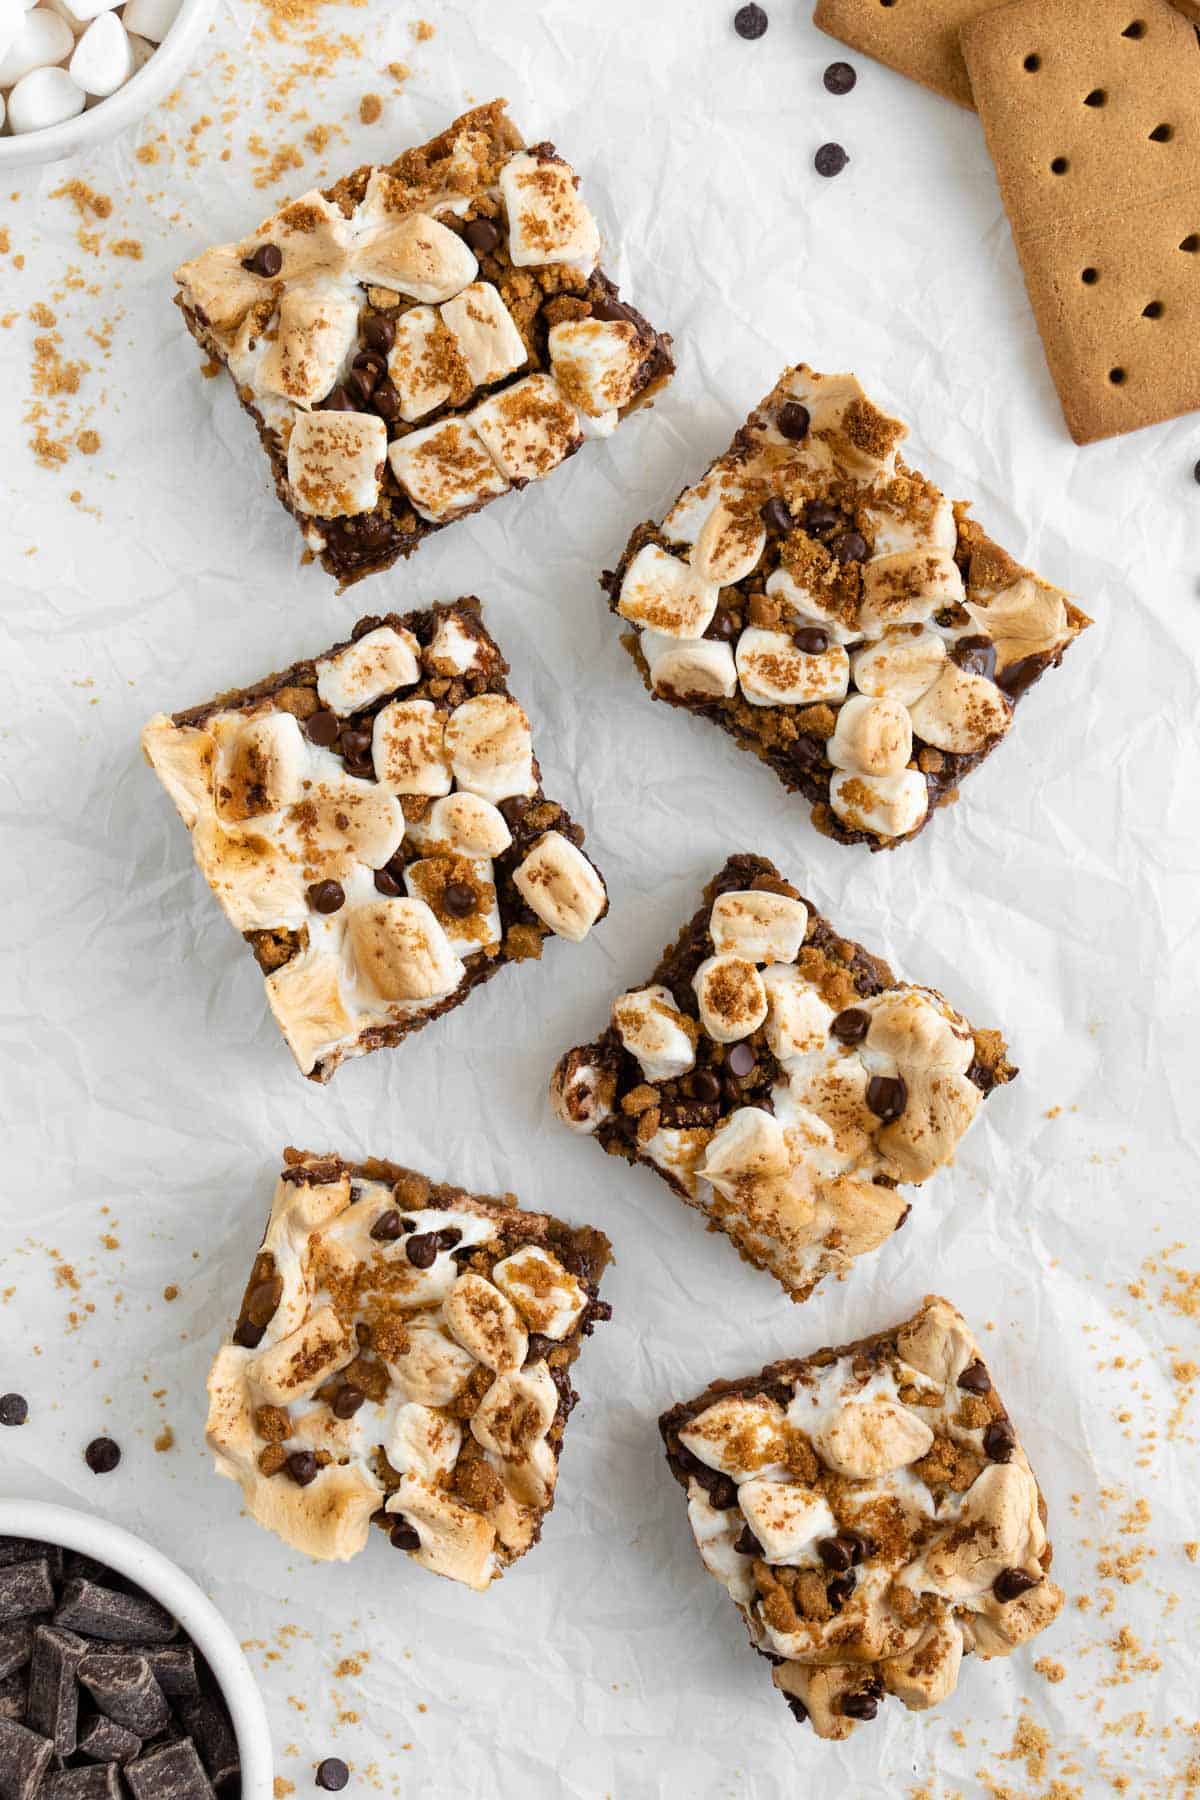 six vegan s'mores bars topped with toasted marshmallows and chocolate chips, surrounded by graham cracker crumbs and chocolate